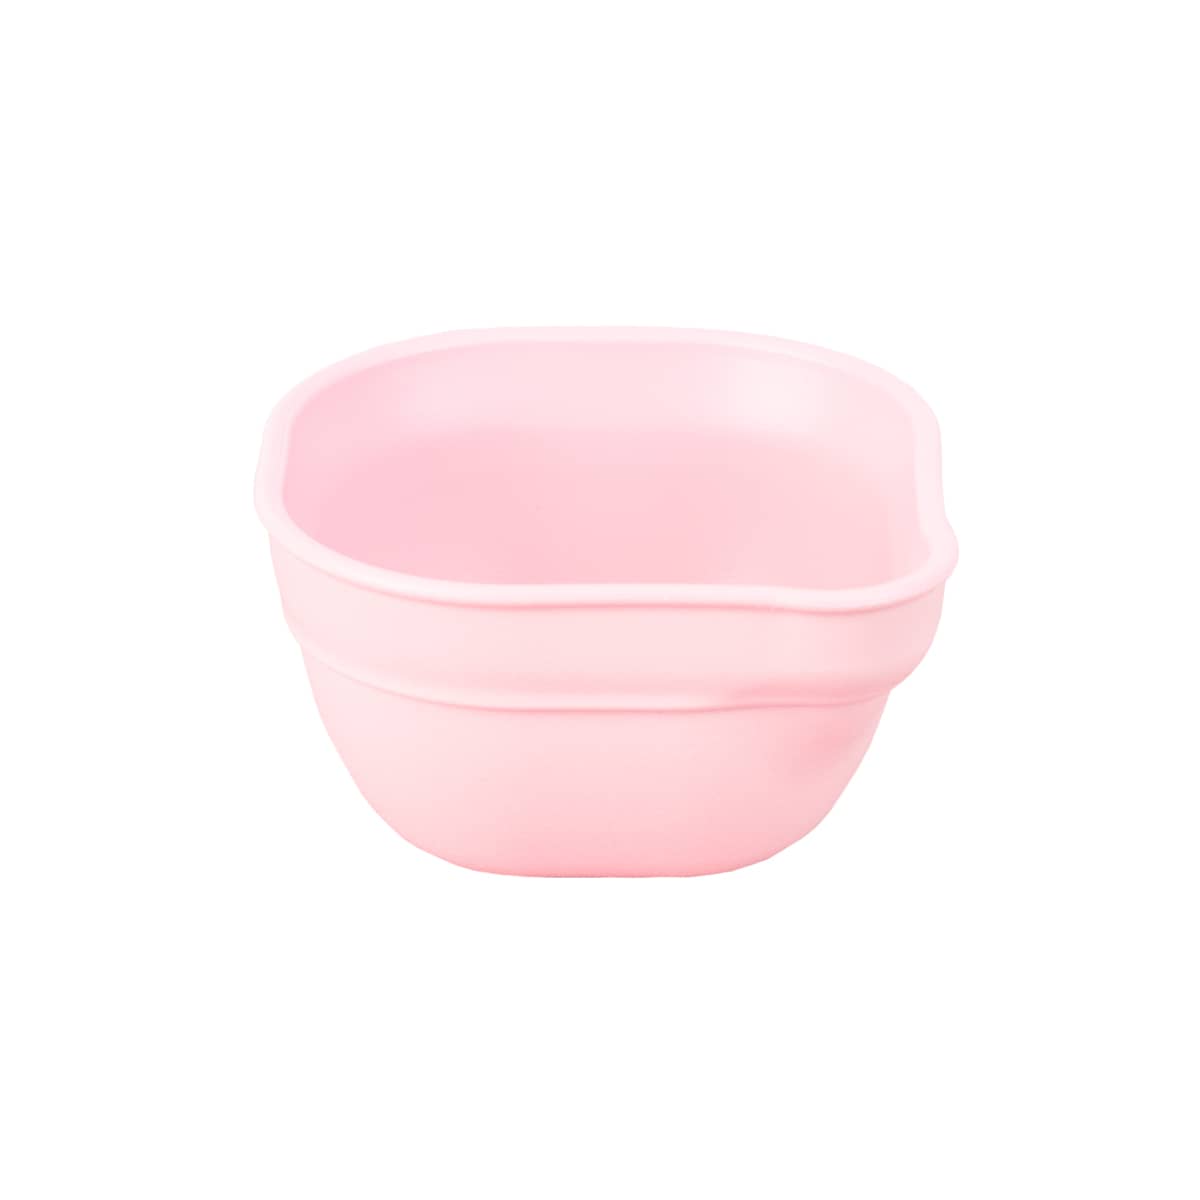 Re-Play Recycled Dip 'n' Pour Bowl - Ice Pink